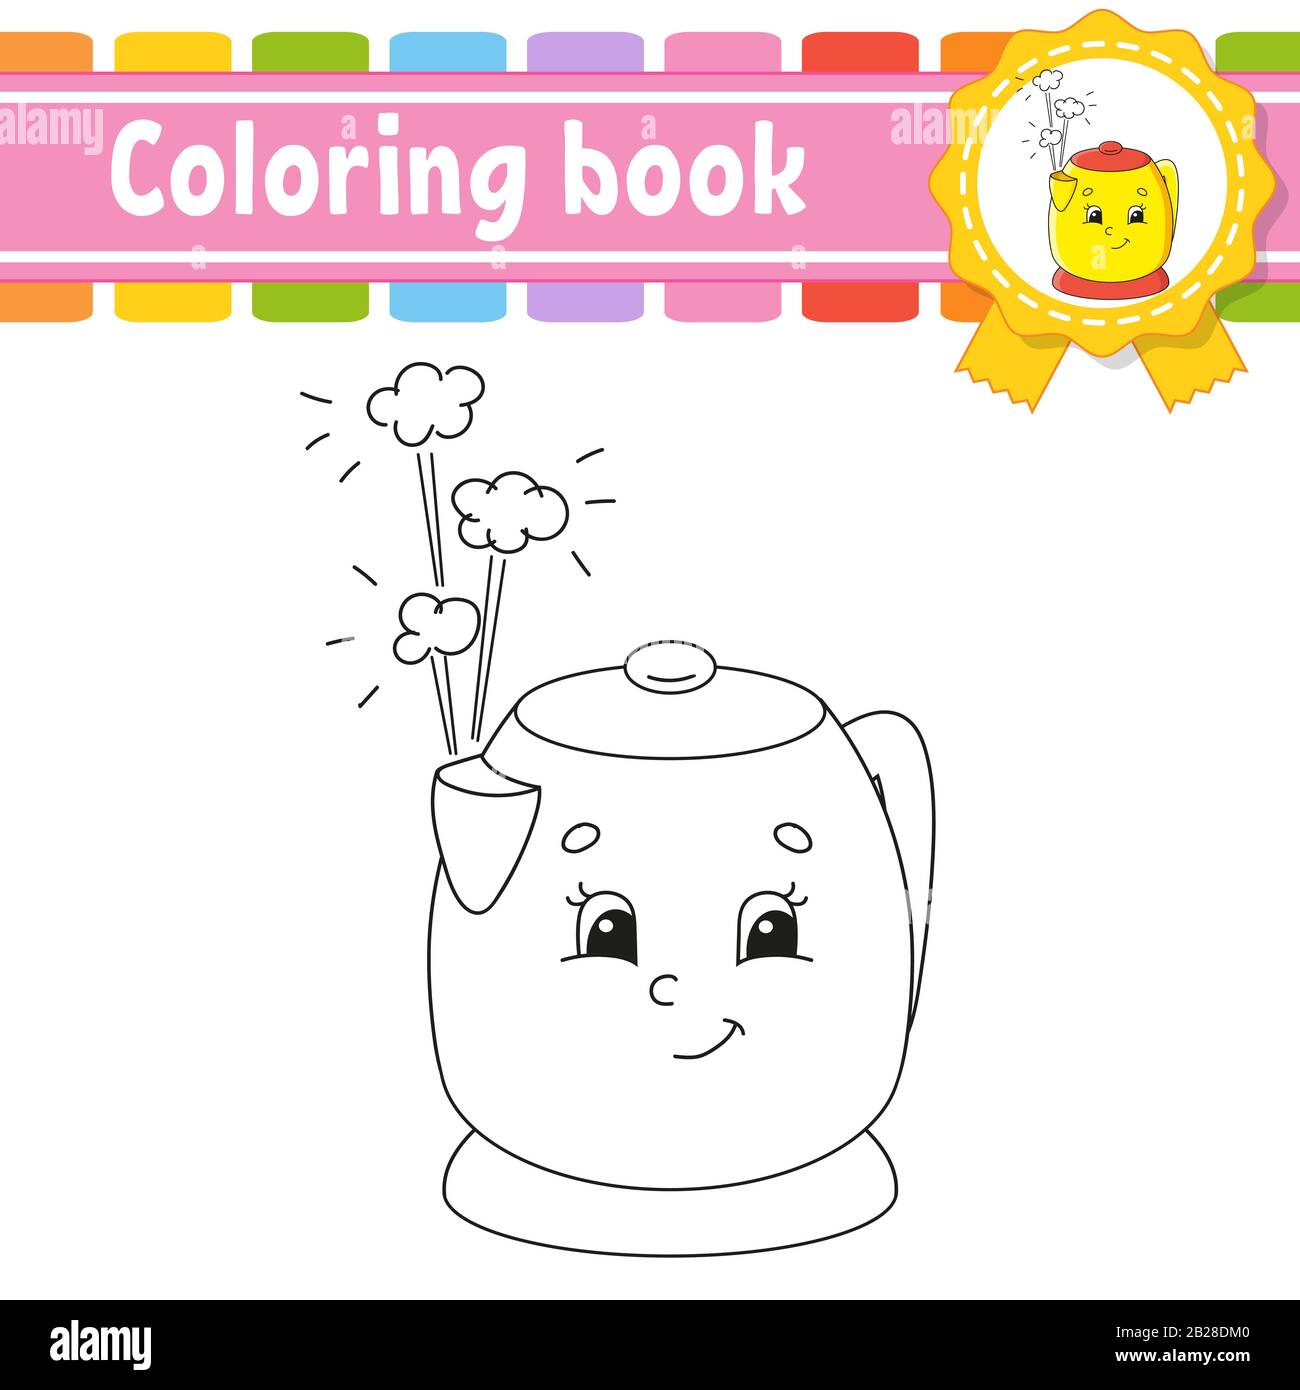 Coloring book for kids. Cheerful character. Vector illustration. Cute cartoon style. Fantasy page for children. Black contour silhouette. Isolated on Stock Vector